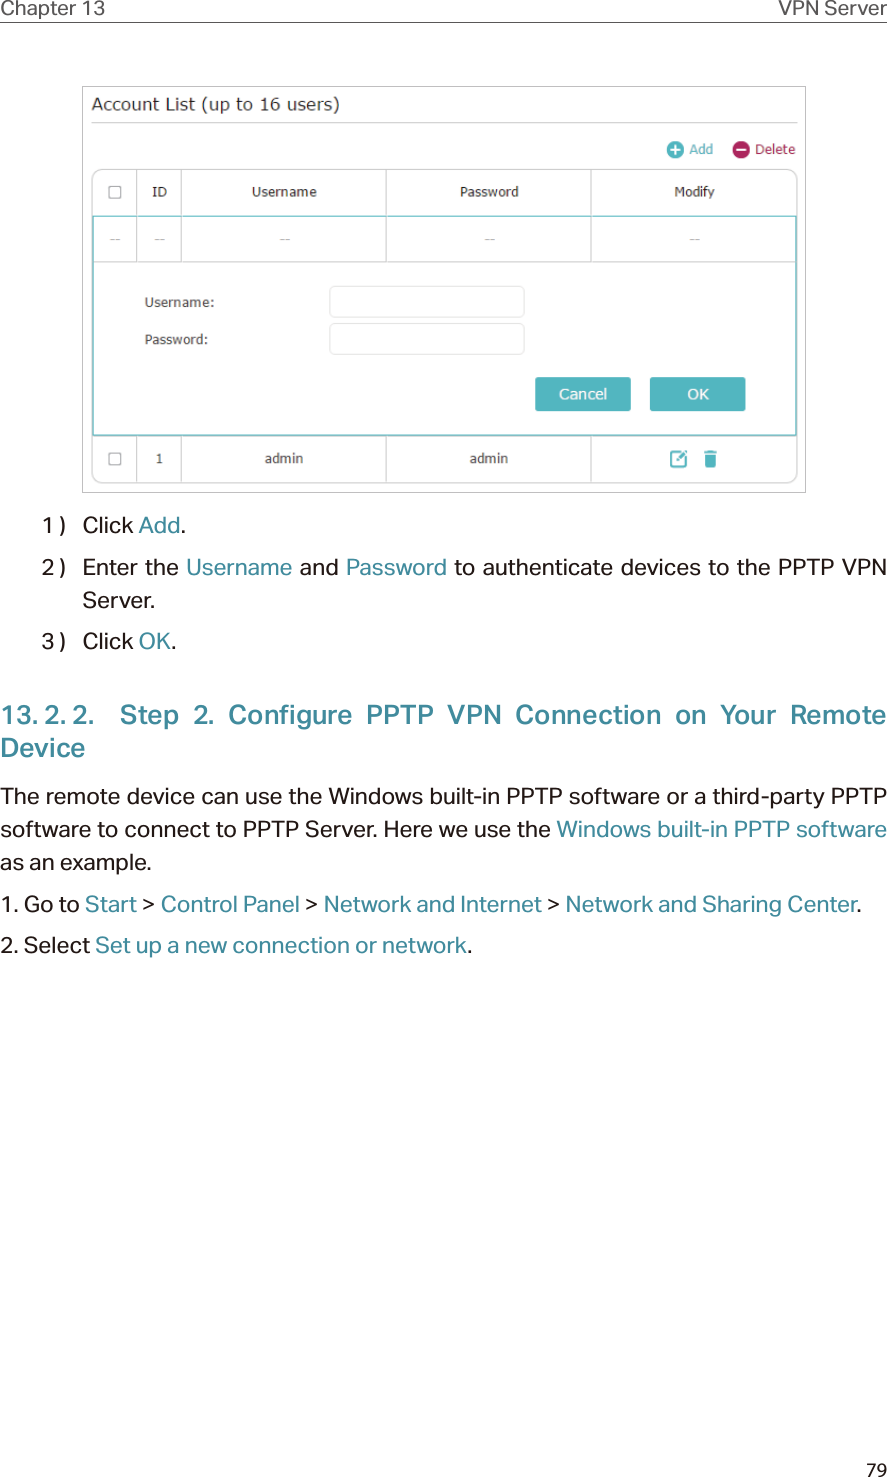 79Chapter 13 VPN Server1 )  Click Add.2 )  Enter the Username and Password to authenticate devices to the PPTP VPN Server.3 )  Click OK.13. 2. 2.  Step 2. Configure PPTP VPN Connection on Your Remote DeviceThe remote device can use the Windows built-in PPTP software or a third-party PPTP software to connect to PPTP Server. Here we use the Windows built-in PPTP software as an example.1. Go to Start &gt; Control Panel &gt; Network and Internet &gt; Network and Sharing Center.2. Select Set up a new connection or network.